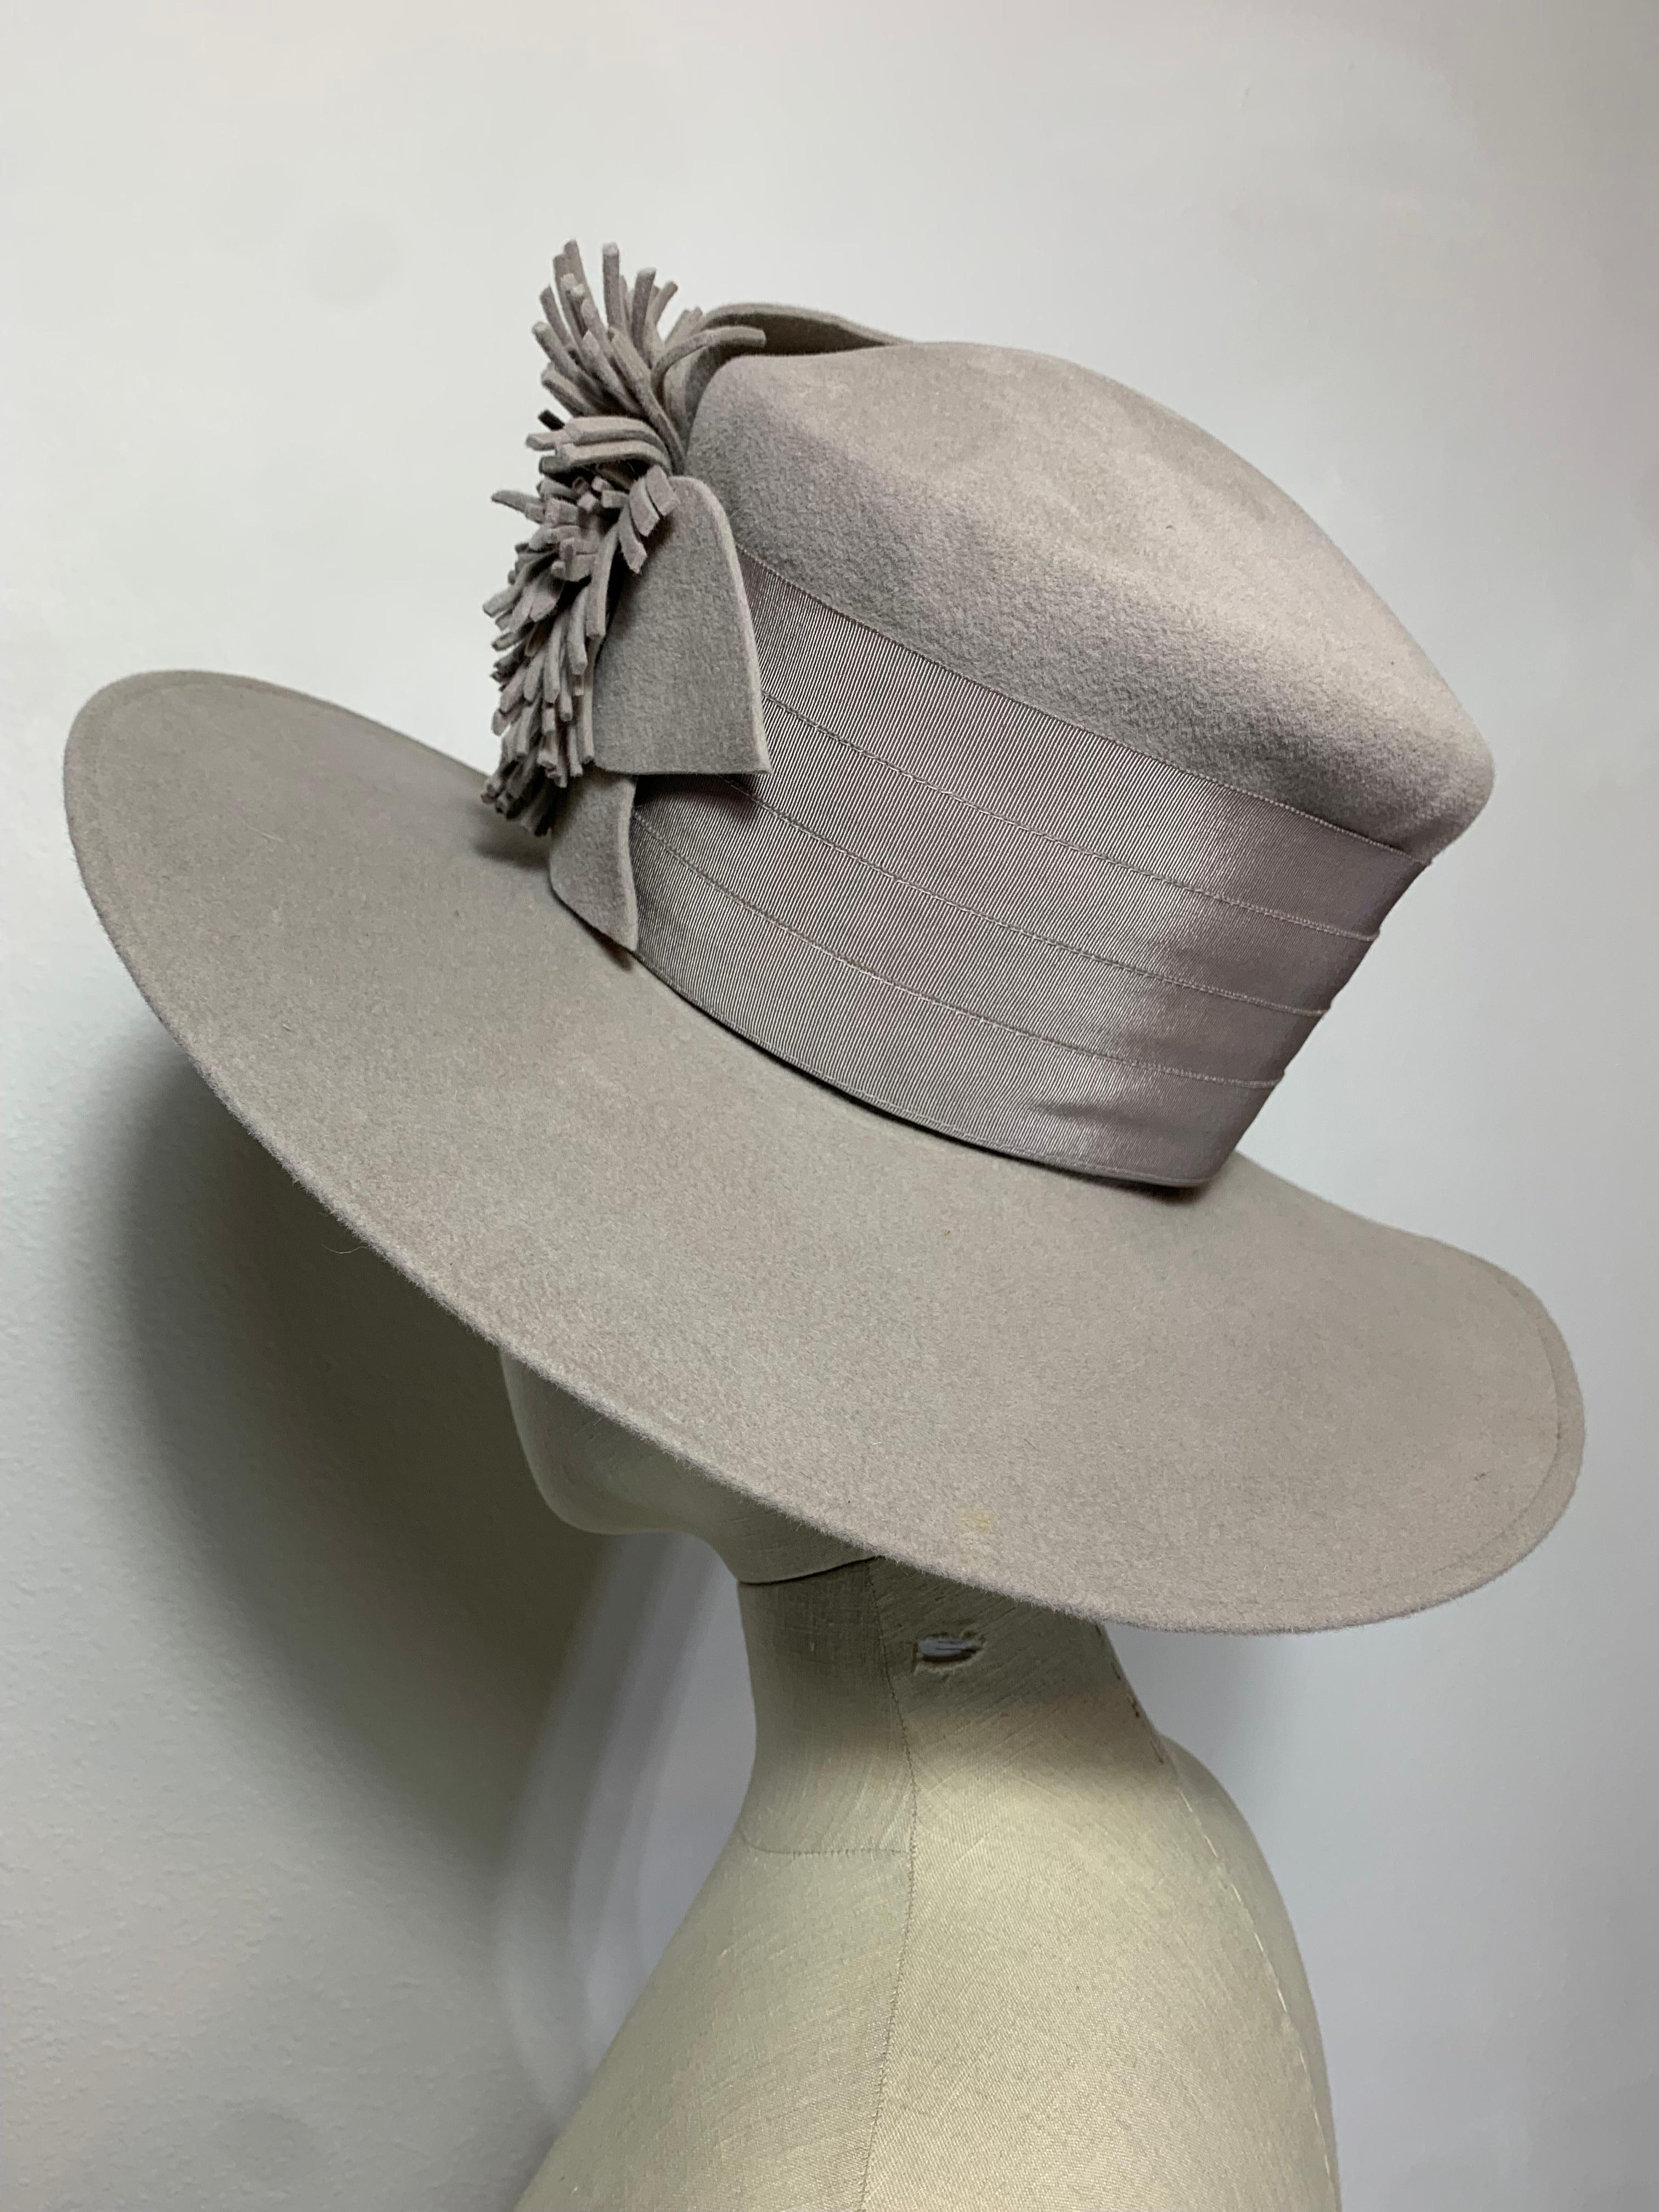 Maison Michel Dove Grey Felt High Top Hat w Matching Flower and Grosgrain Band For Sale 1